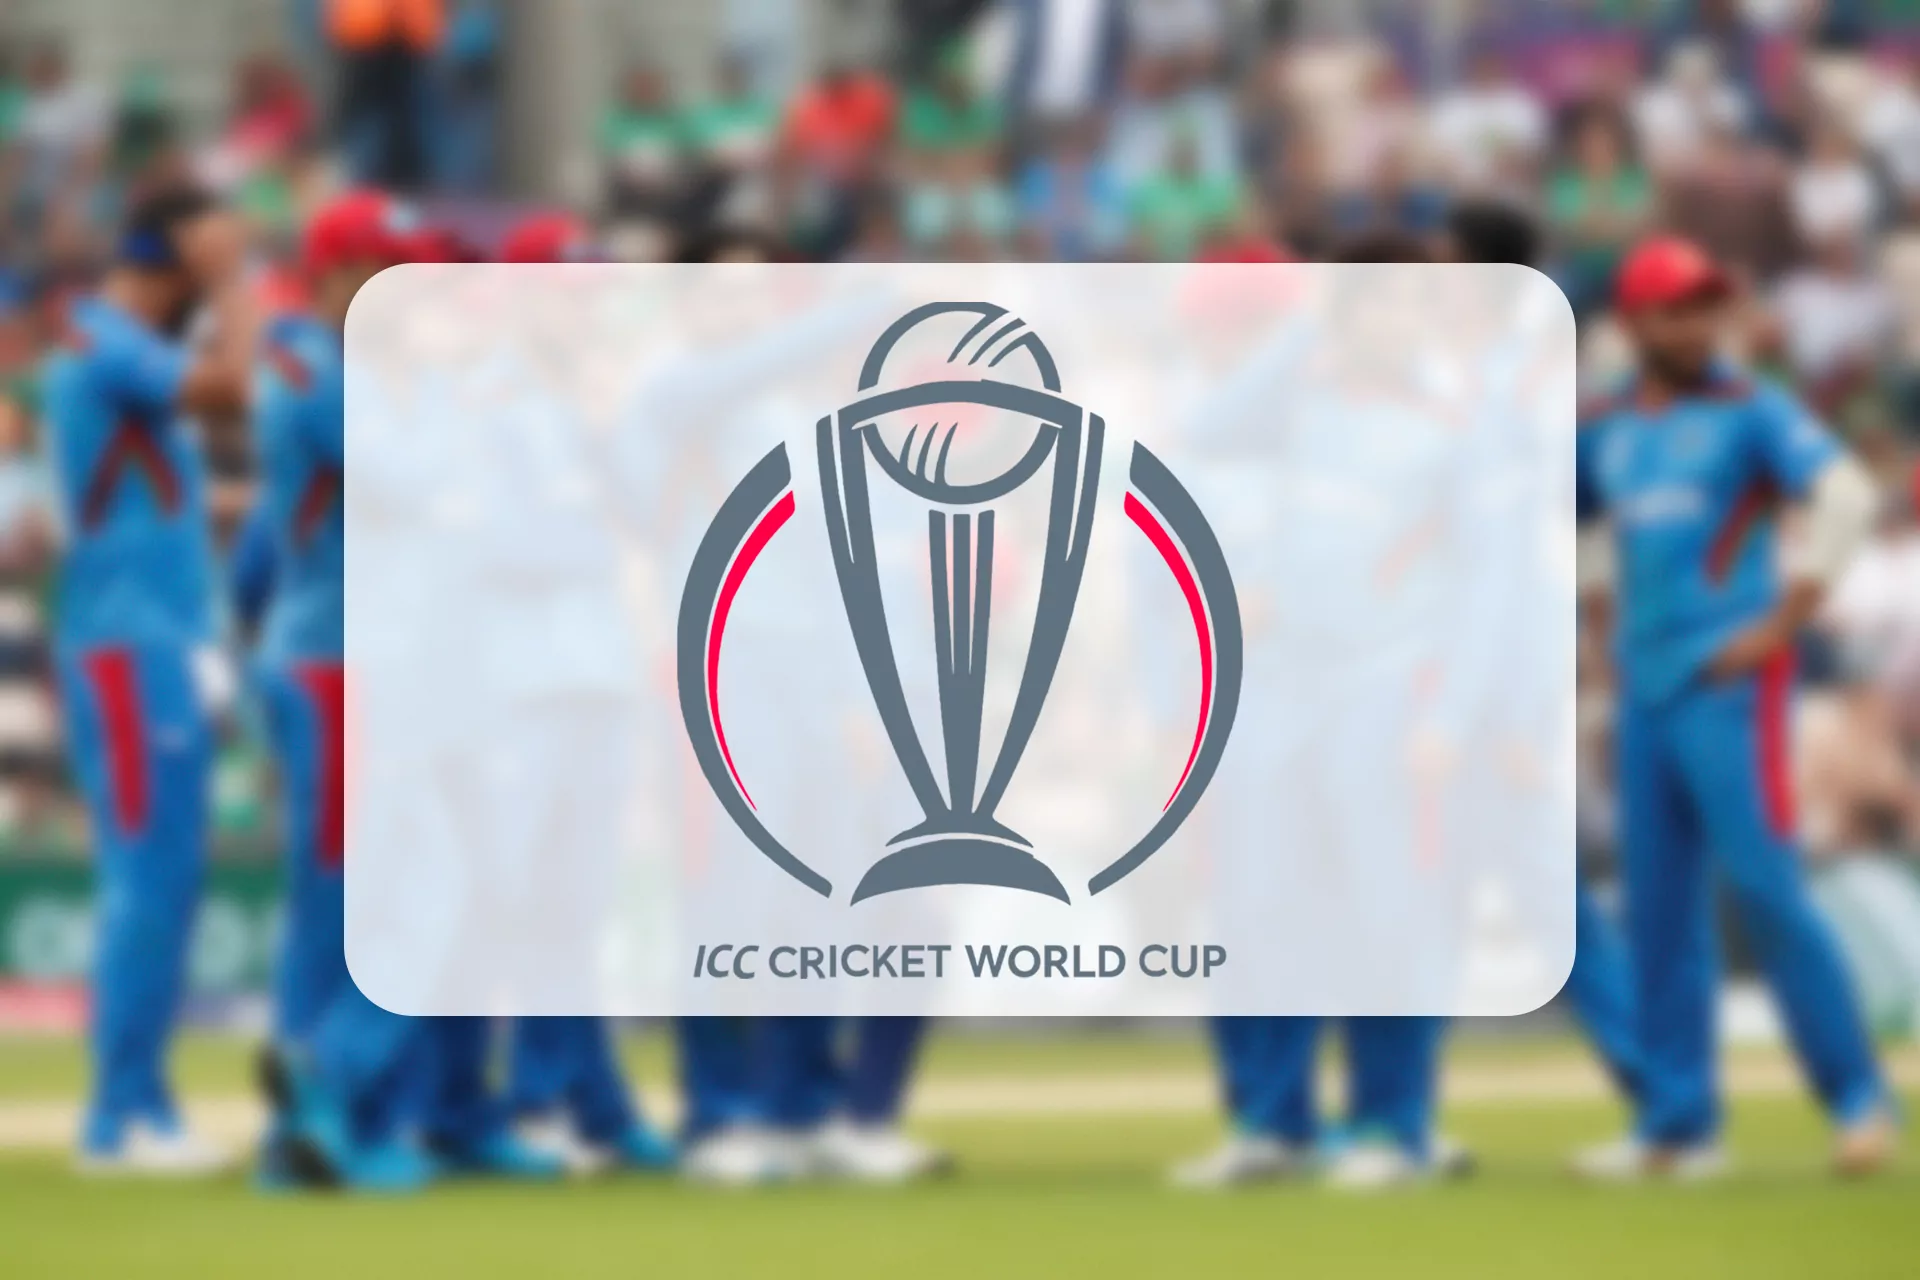 The tournament of the ICC Cricket World Cup is a top-level international championship.